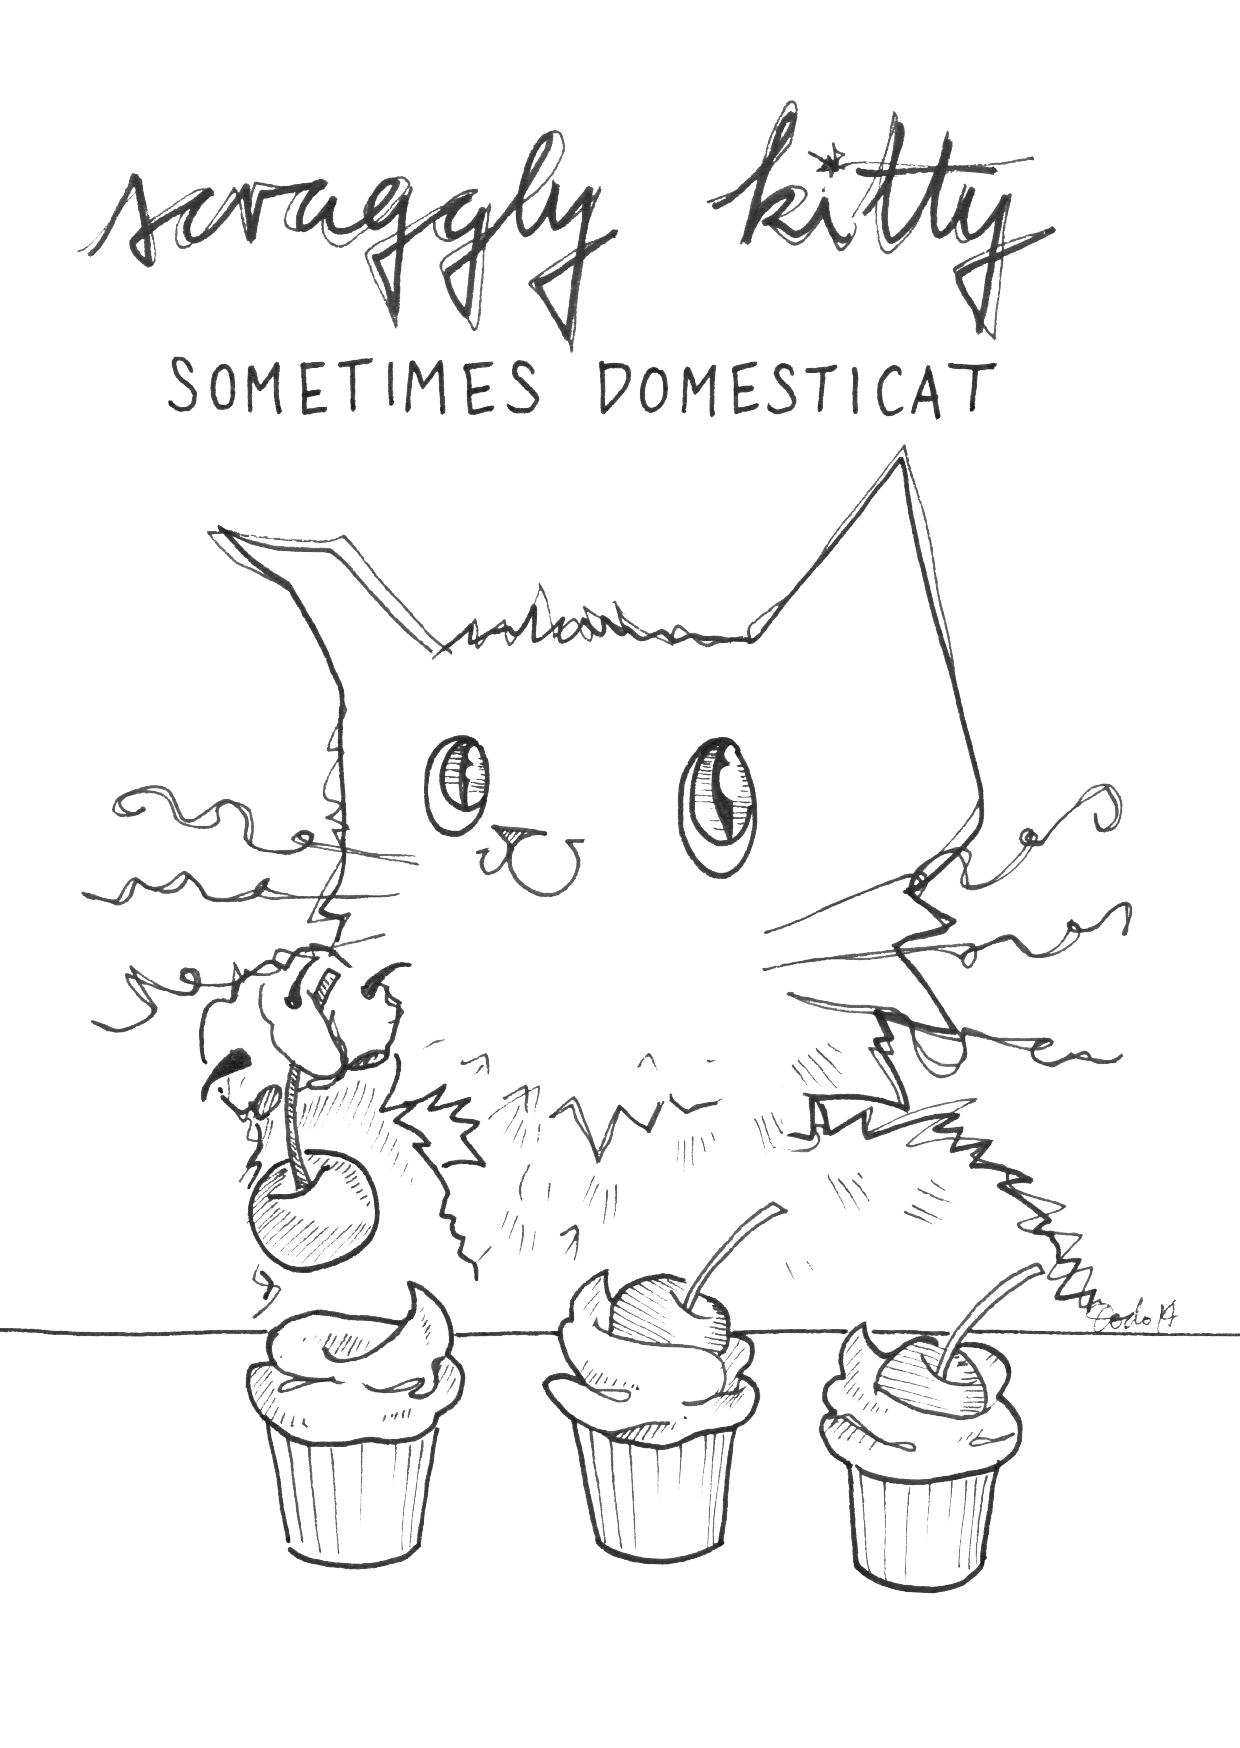 Scraggly Kitty Sometimes Domesticat Greeting Card